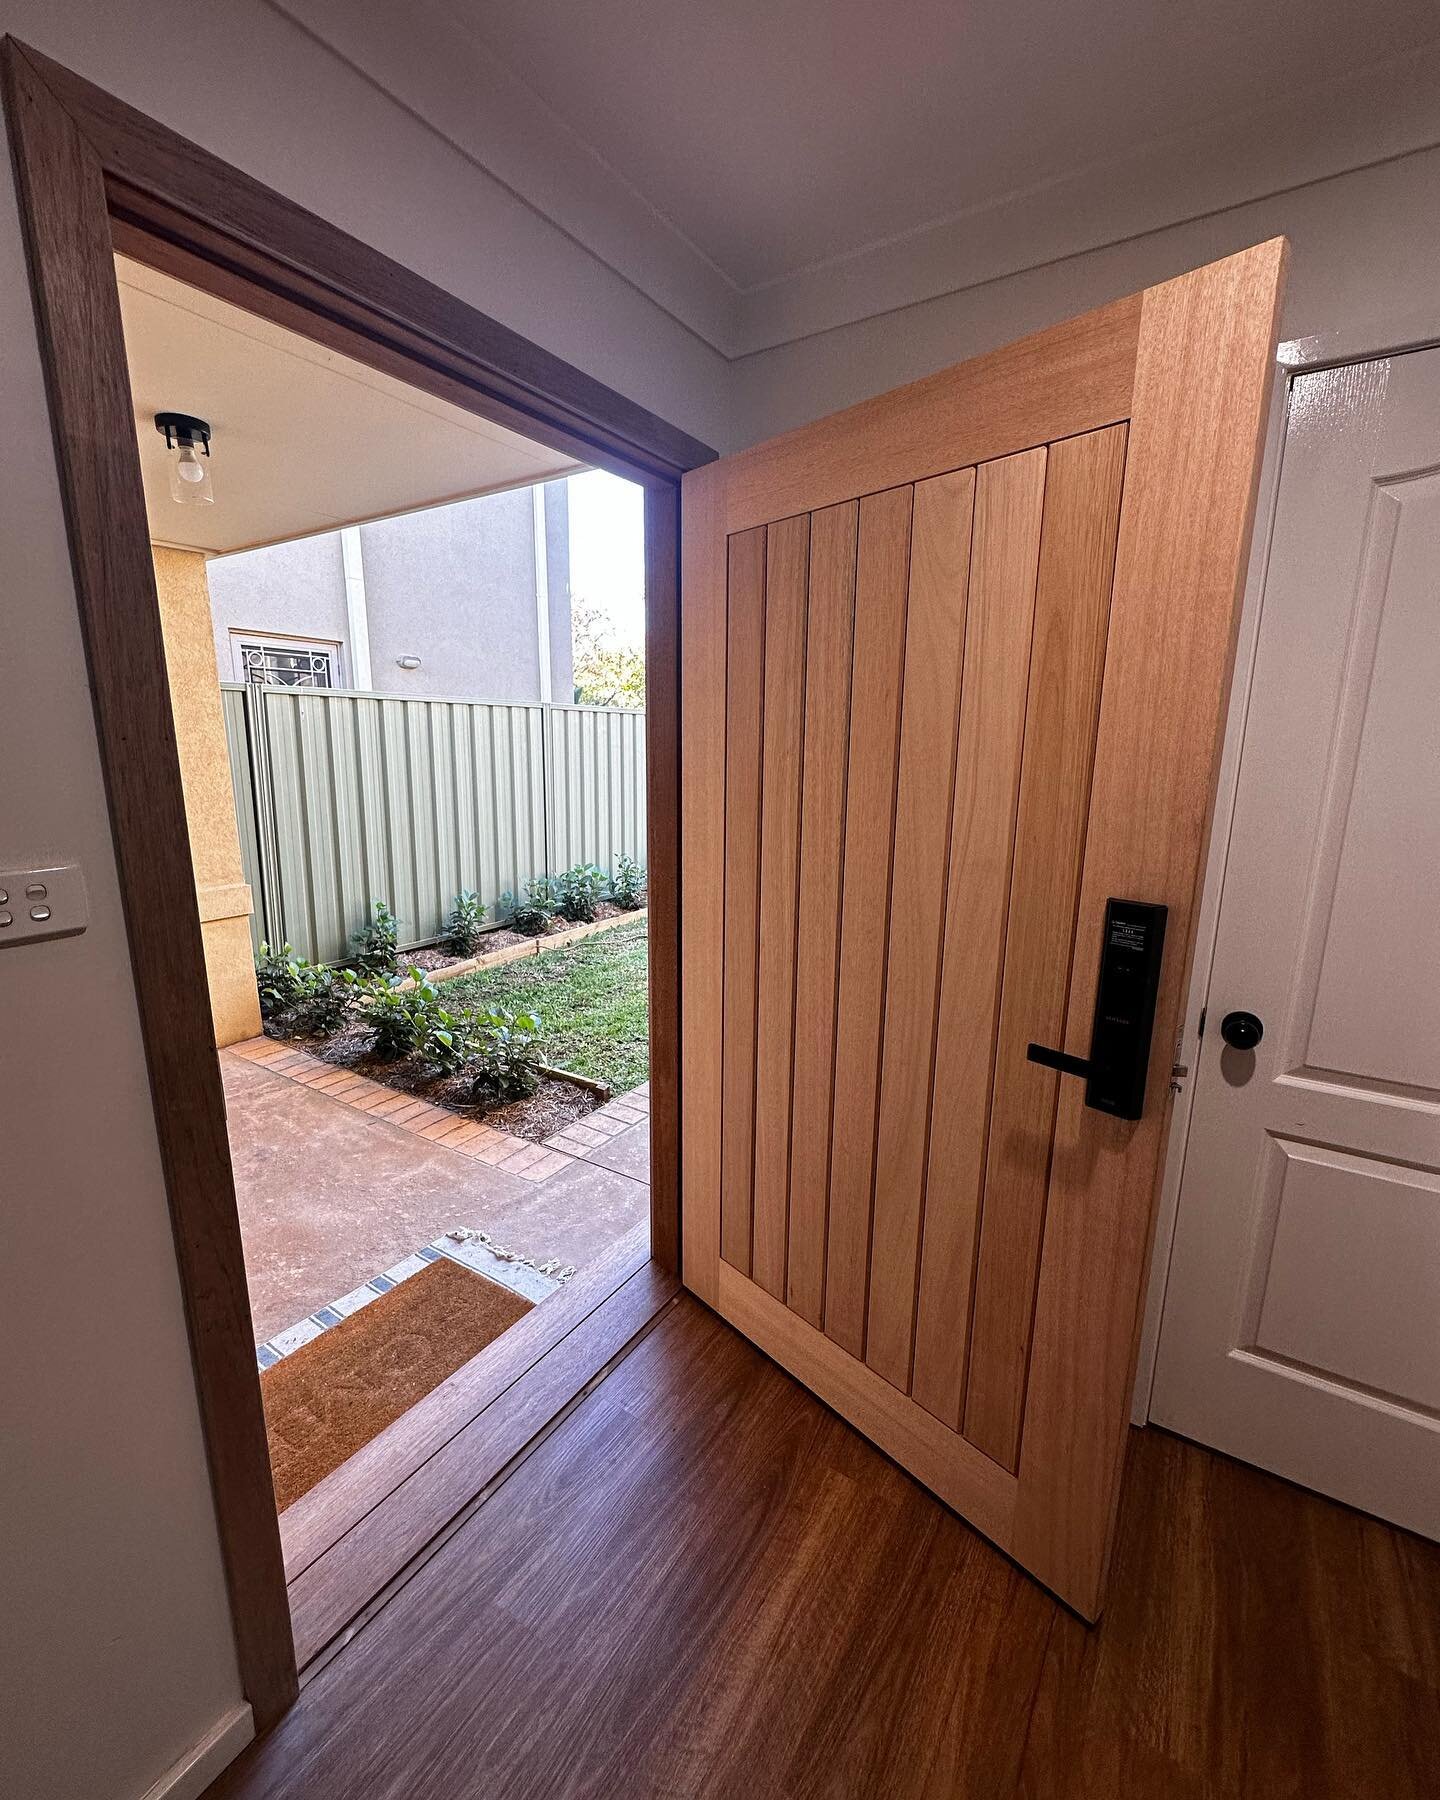 C O N T E M P O 🚪

Another wide door conversion completed in Harrington Park - the Contempo 4 door from our range is a personal favourite &amp; always comes up stellar

Complete with a merbau entry step replacement to finish the look

For hardware, 